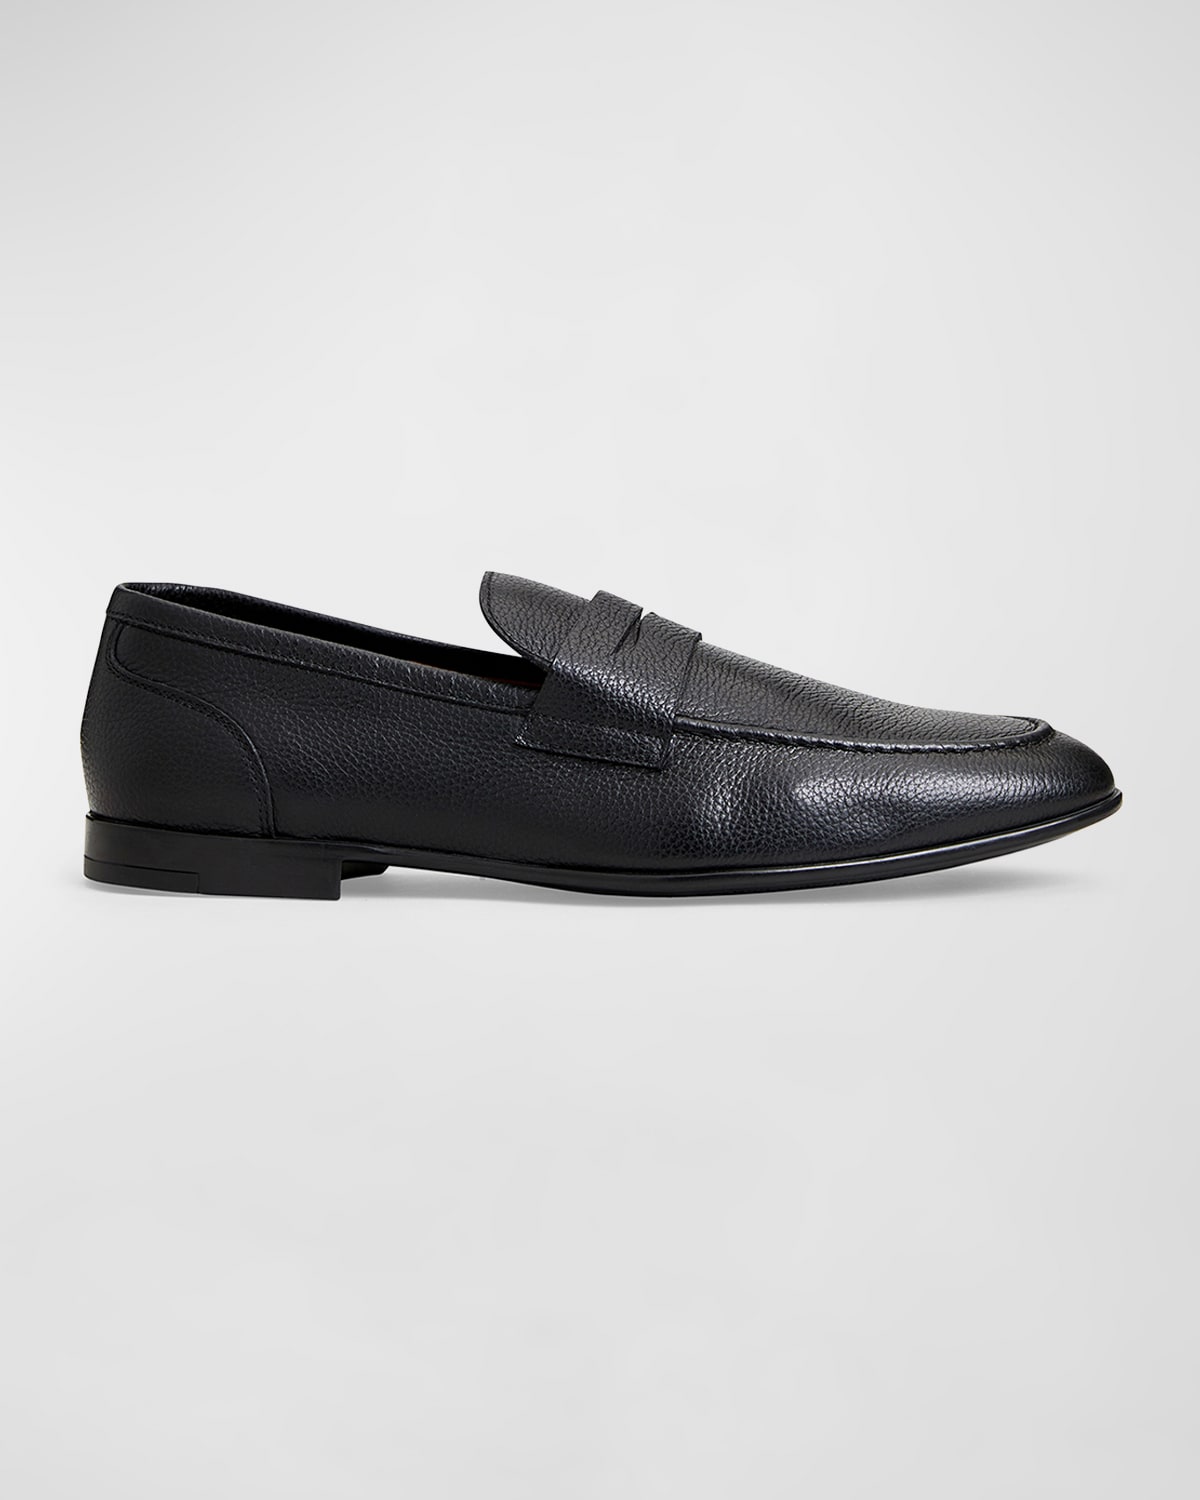 Bruno Magli Men's Suede Penny Loafers